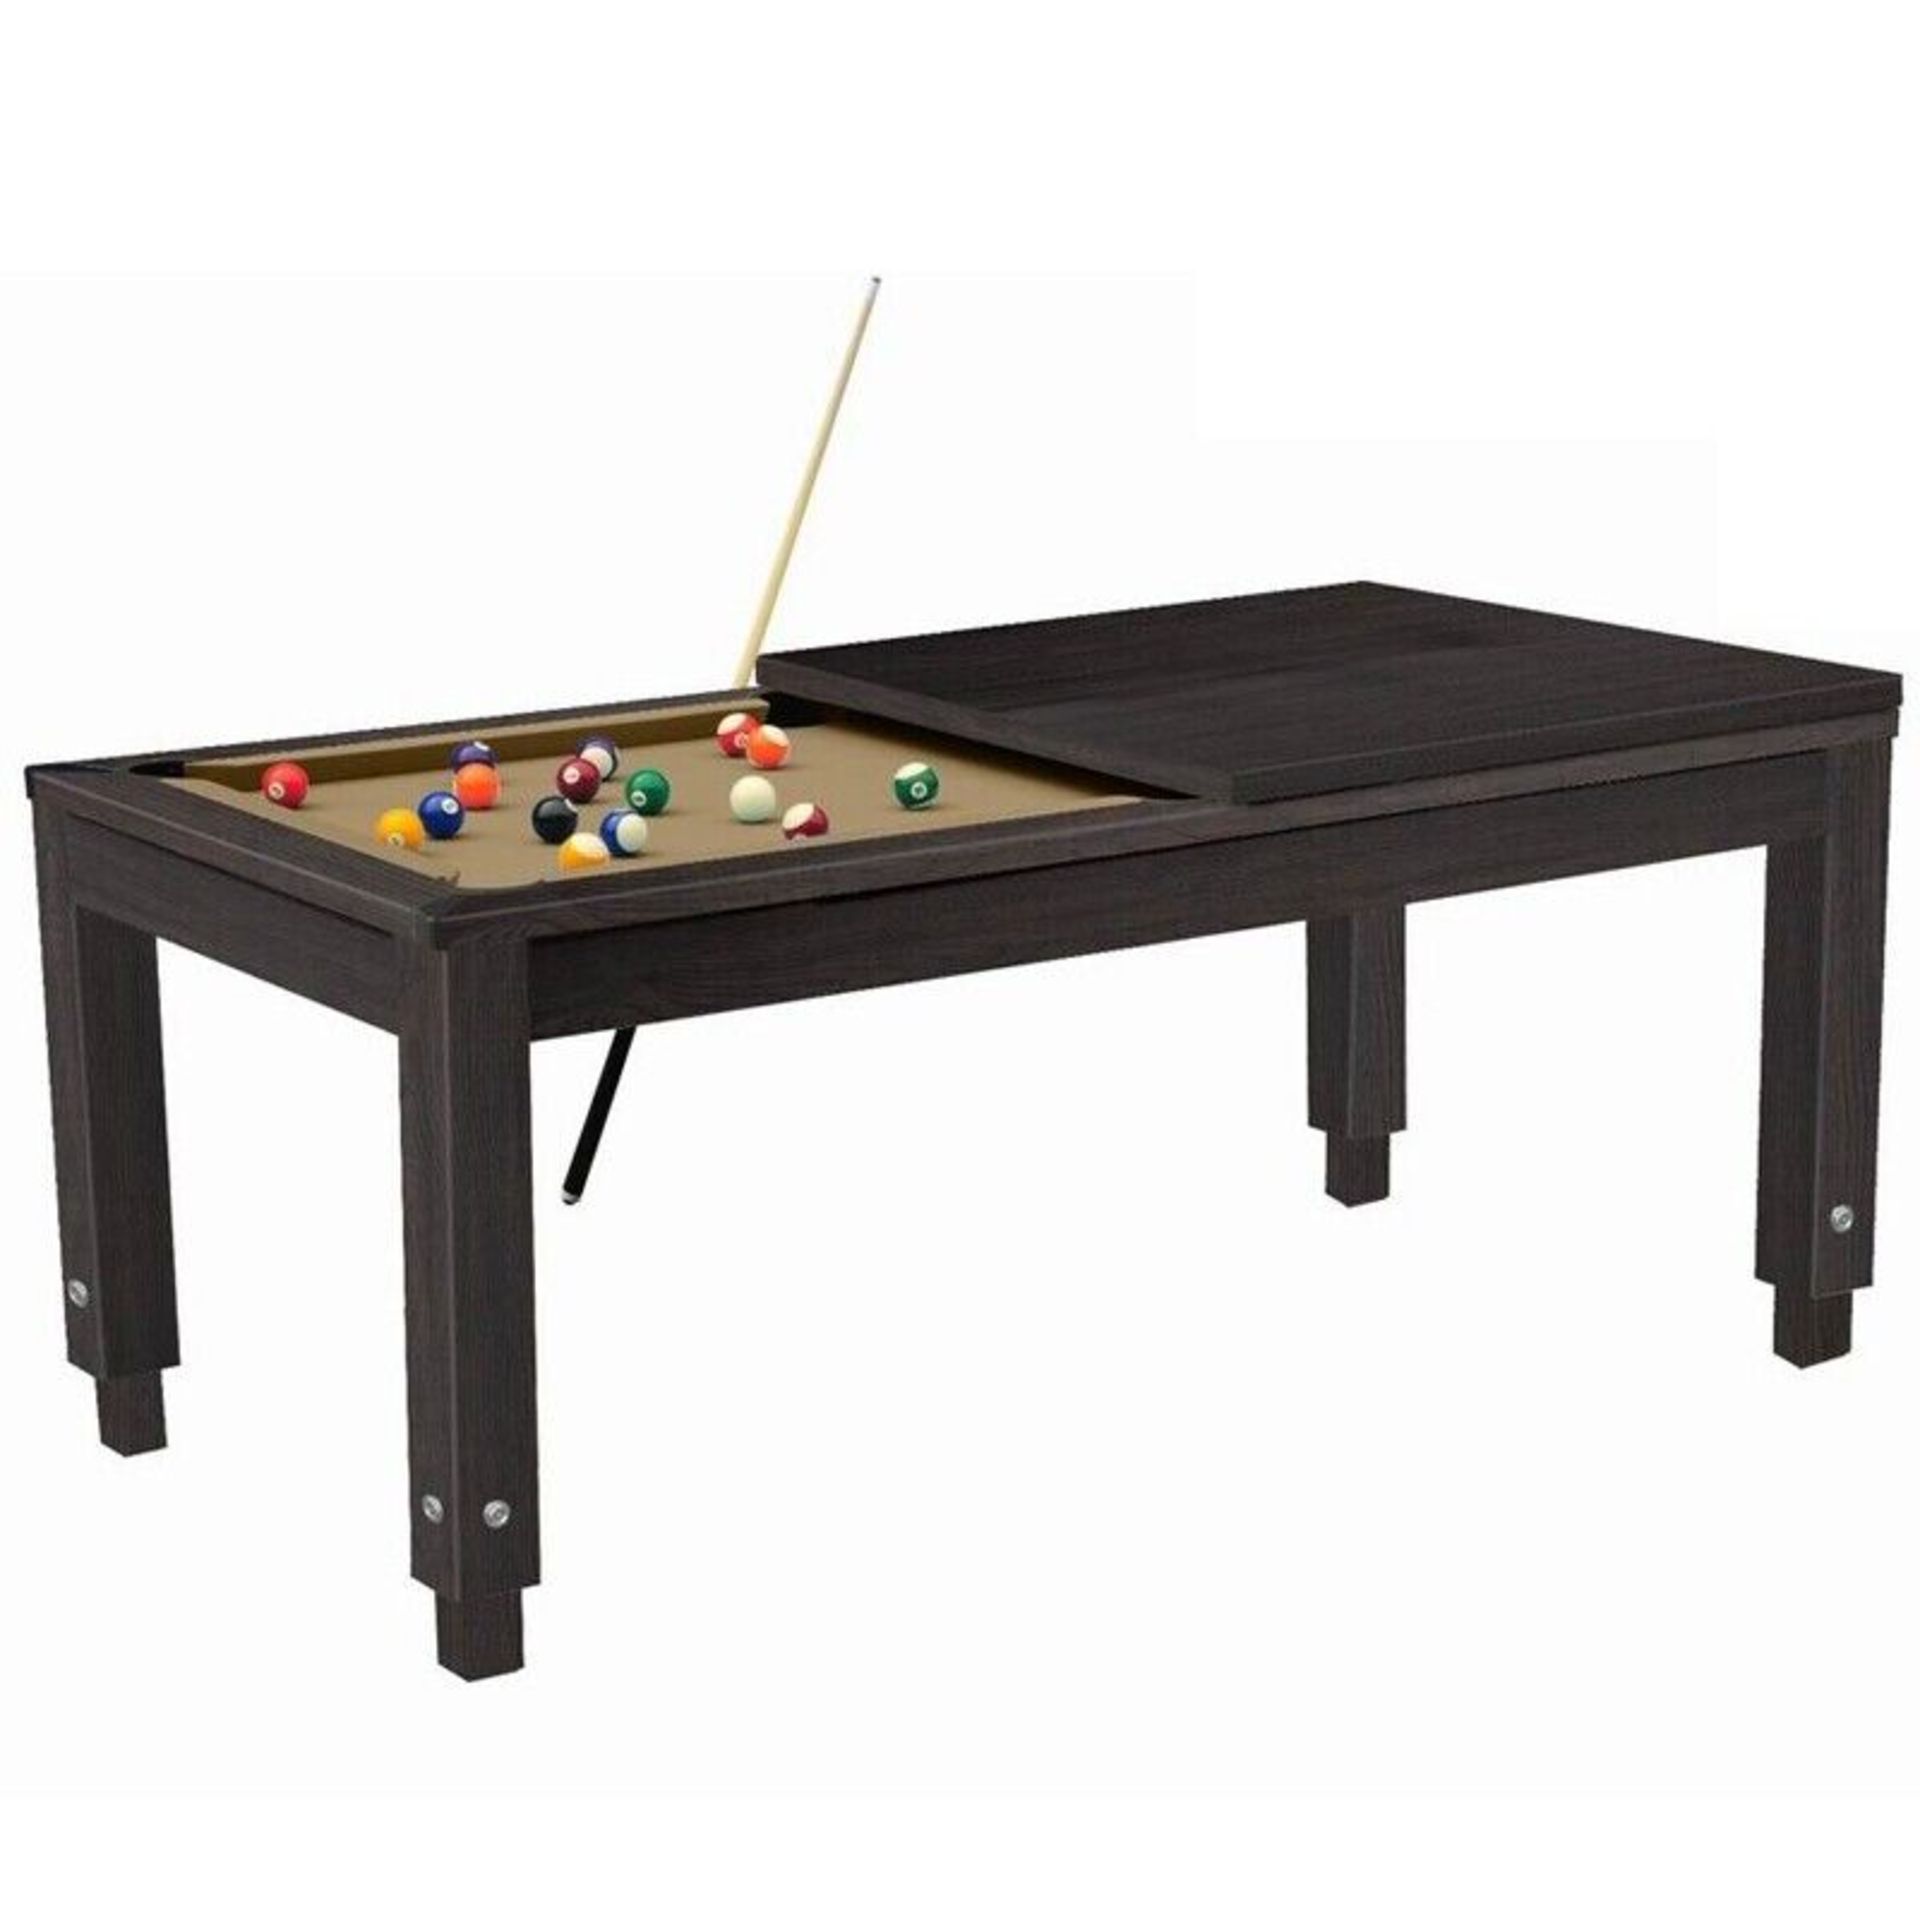 7FT - 2 IN 1 DINING TABLE AND POOL TABLE